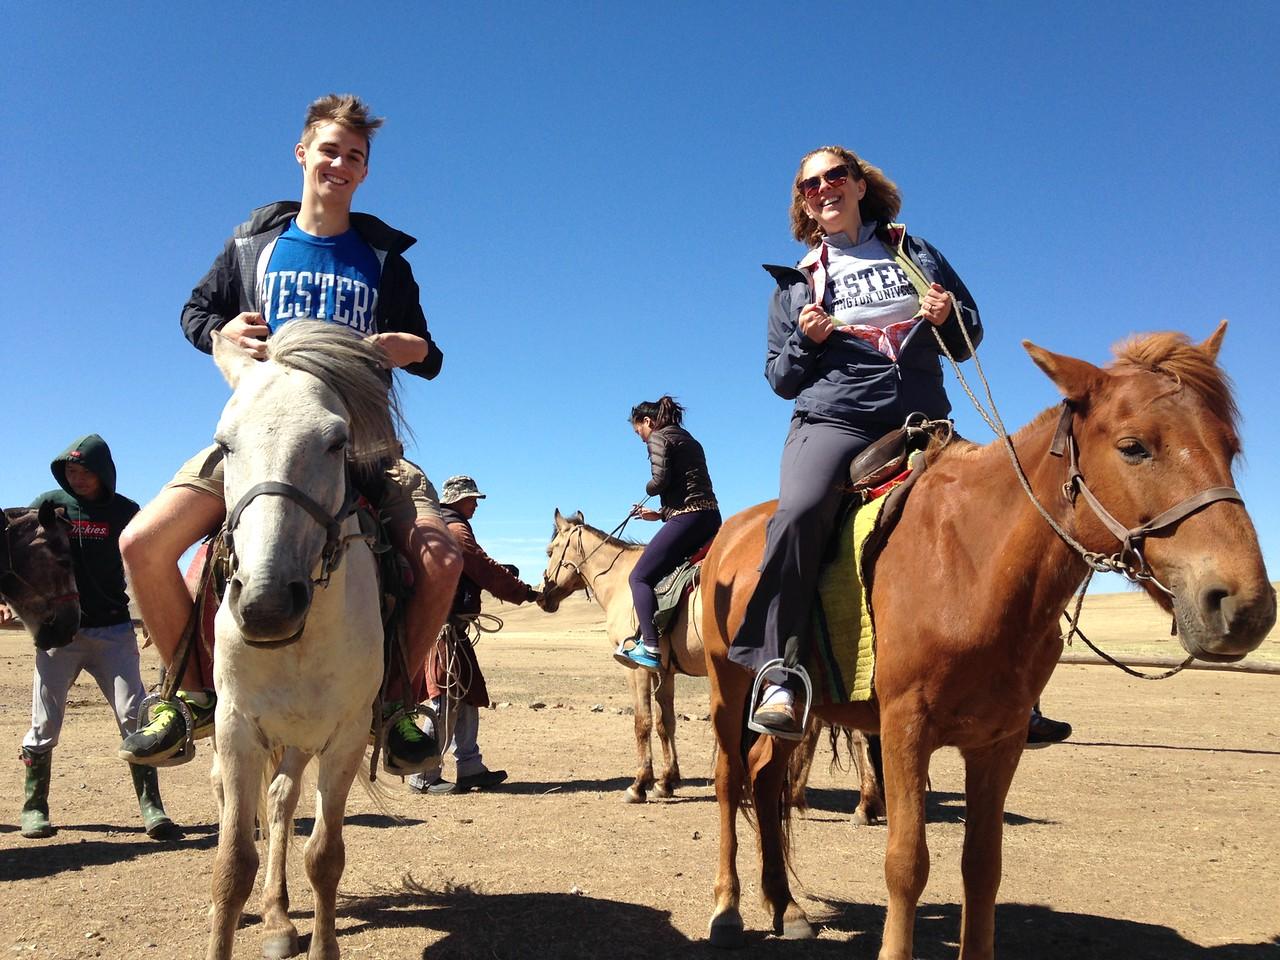 two people on horseback smiling at the camera and holding open their jackets to show a WWU t-shirt